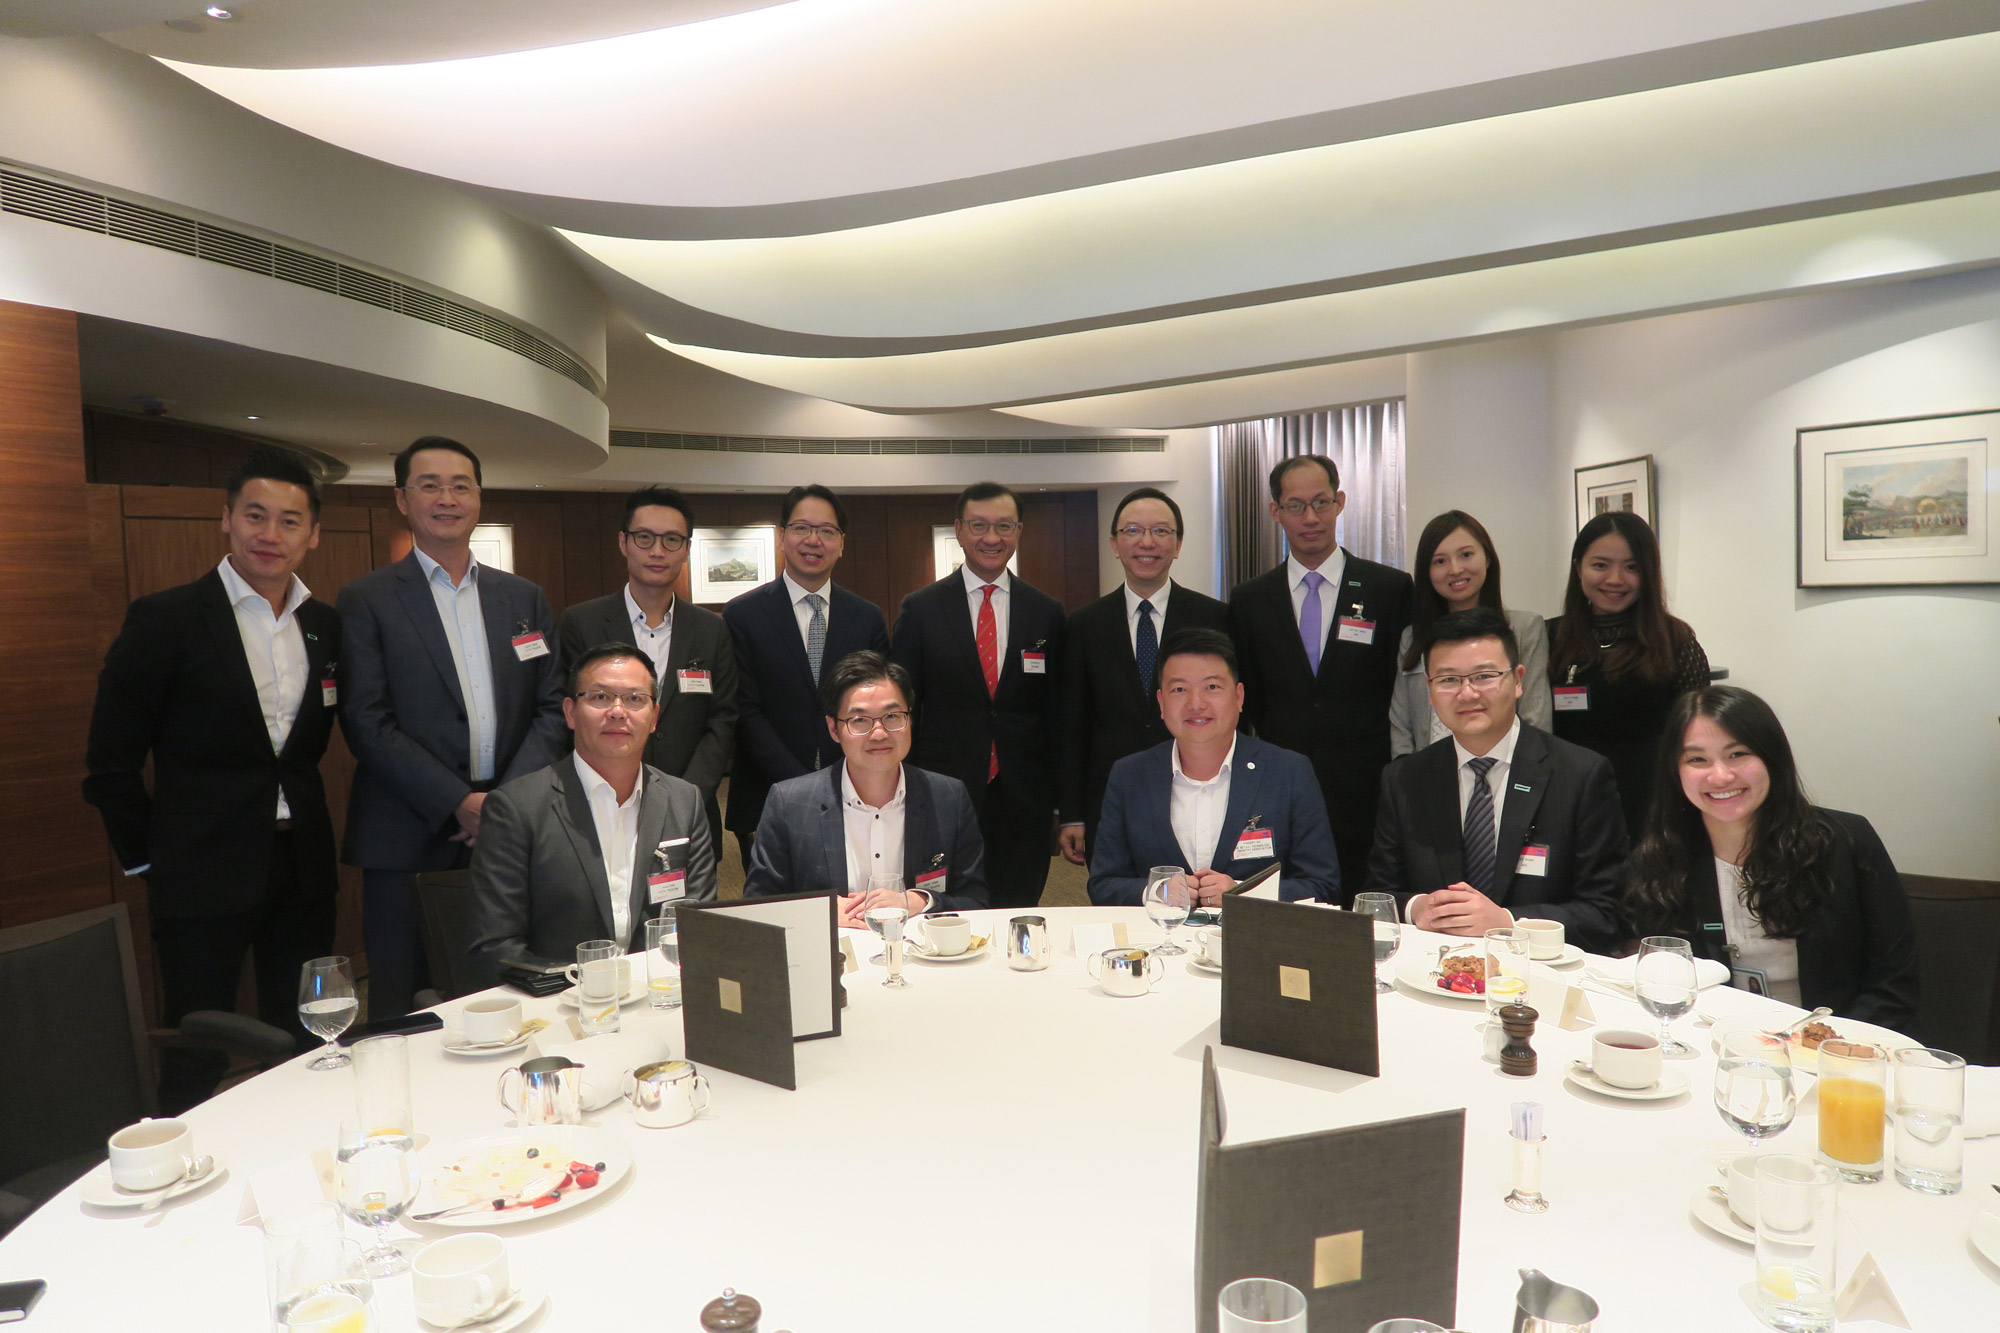 Mr. Victor Lam, Government Chief Information Officer, with the guests at the “Hong Kong Management Association (HKMA) IT Management Club Luncheon”